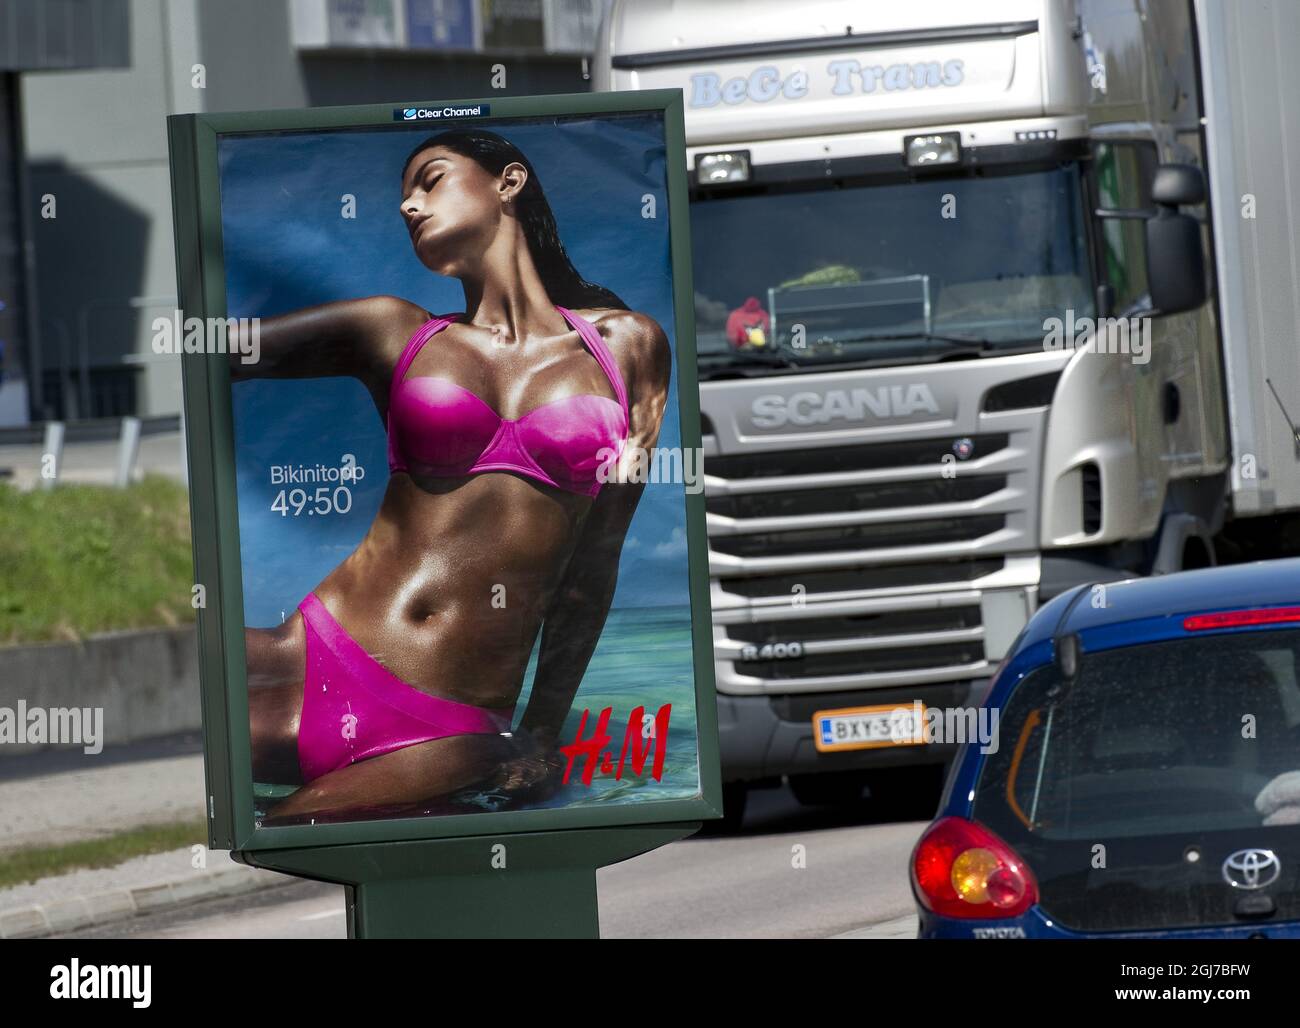 STOCKHOLM 2012-05-10 H & M's extremely tanned bikini models reinforces  dangerous beauty ideals, and contributes to more loss of lives in skin  cancer, writes representatives of the Swedish Cancer Society in a